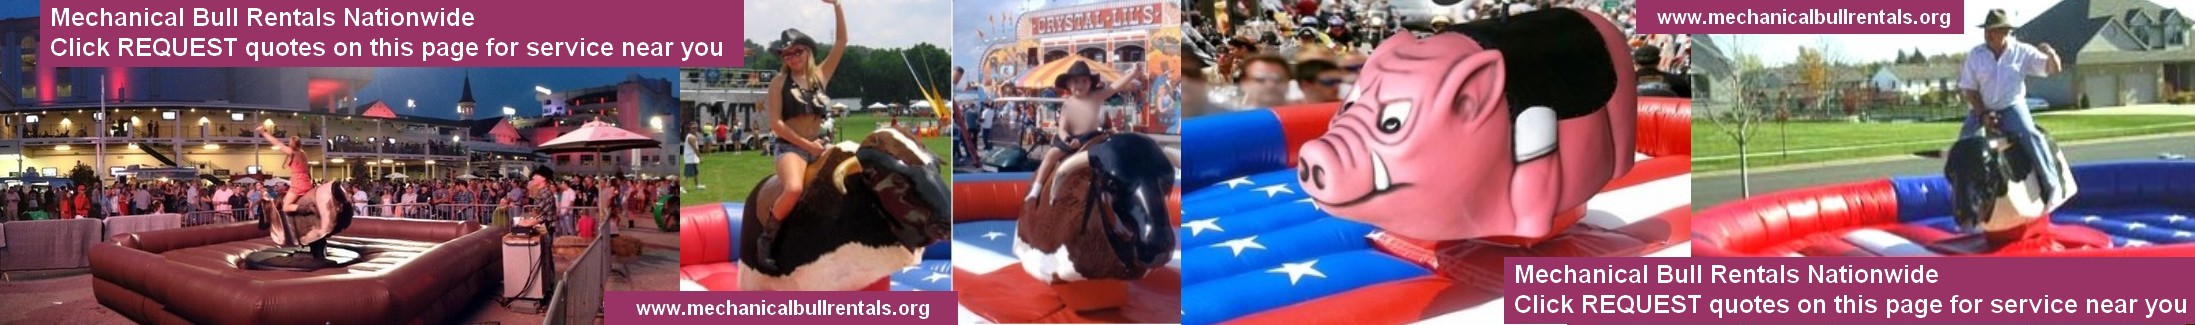 Mechanical Bull Rentals Bloomfield New Jersey NJ and near you. Free referrals to local mechanical bull companies LOGO